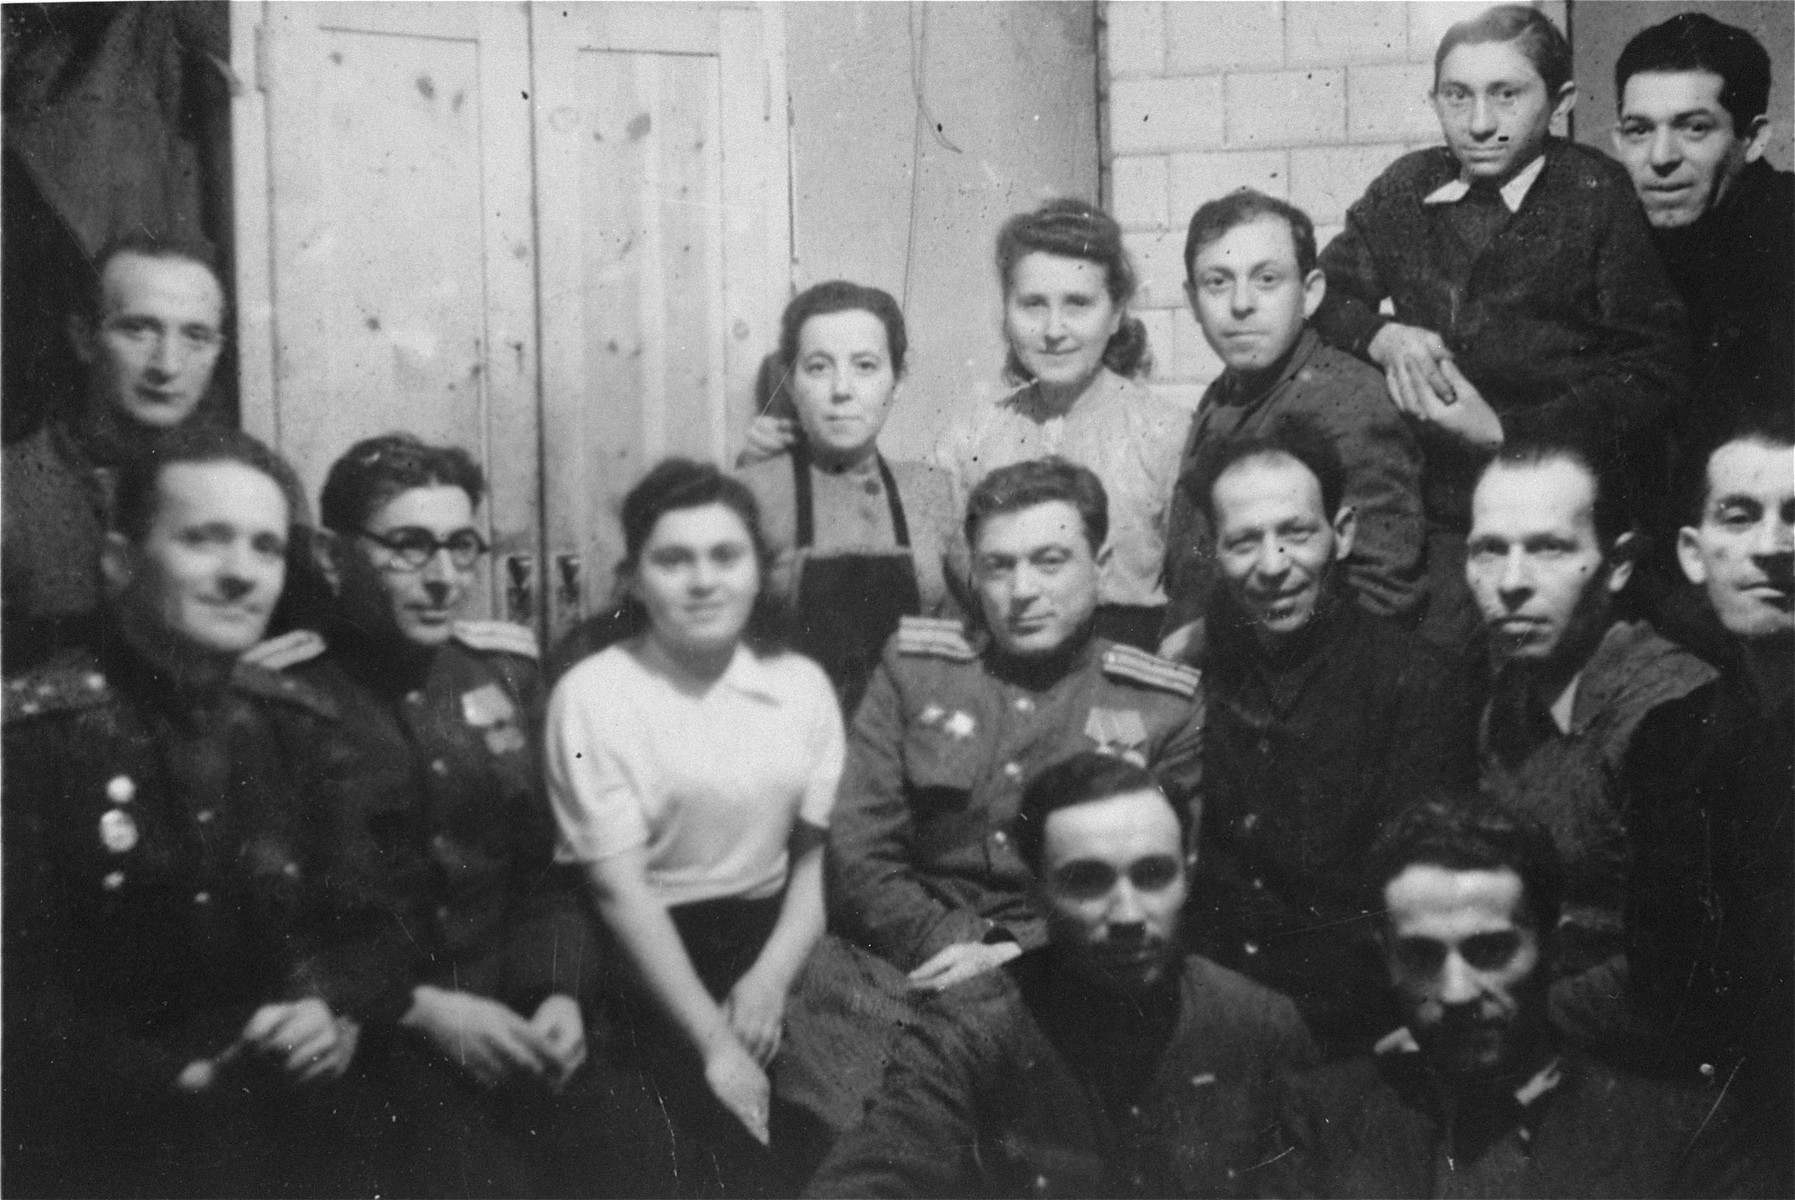 Jewish survivors in Czestochowa pose with Soviet soldiers and officers who liberated the area.

Among those pictured are Jack and Hela Shipper, Laibish Kornberg and Hershel Proszeh.